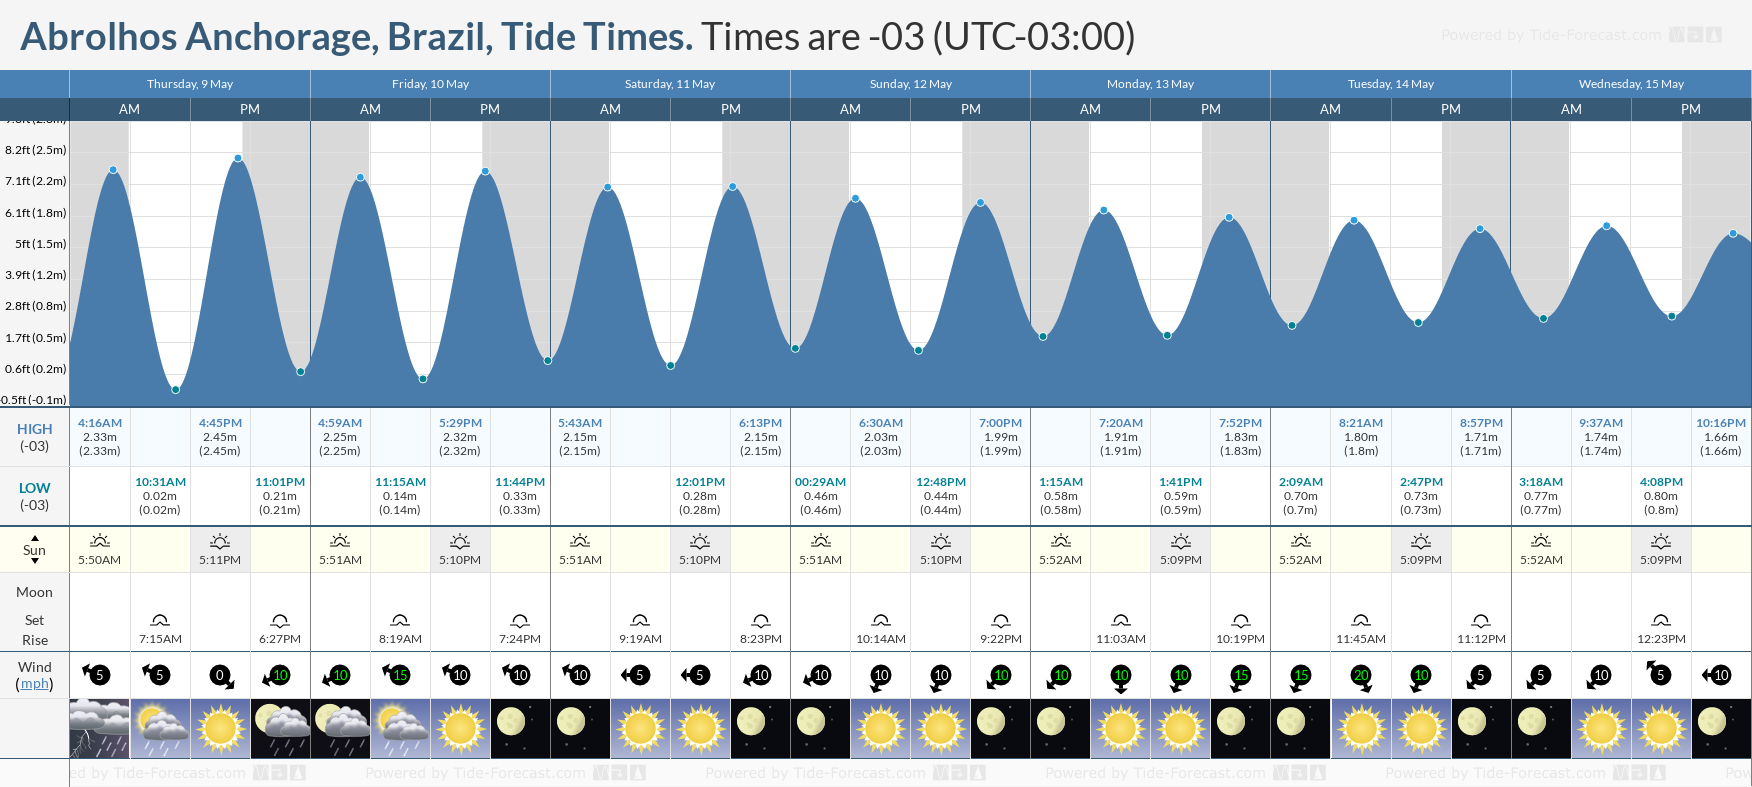 Abrolhos Anchorage, Brazil Tide Chart including high and low tide tide times for the next 7 days